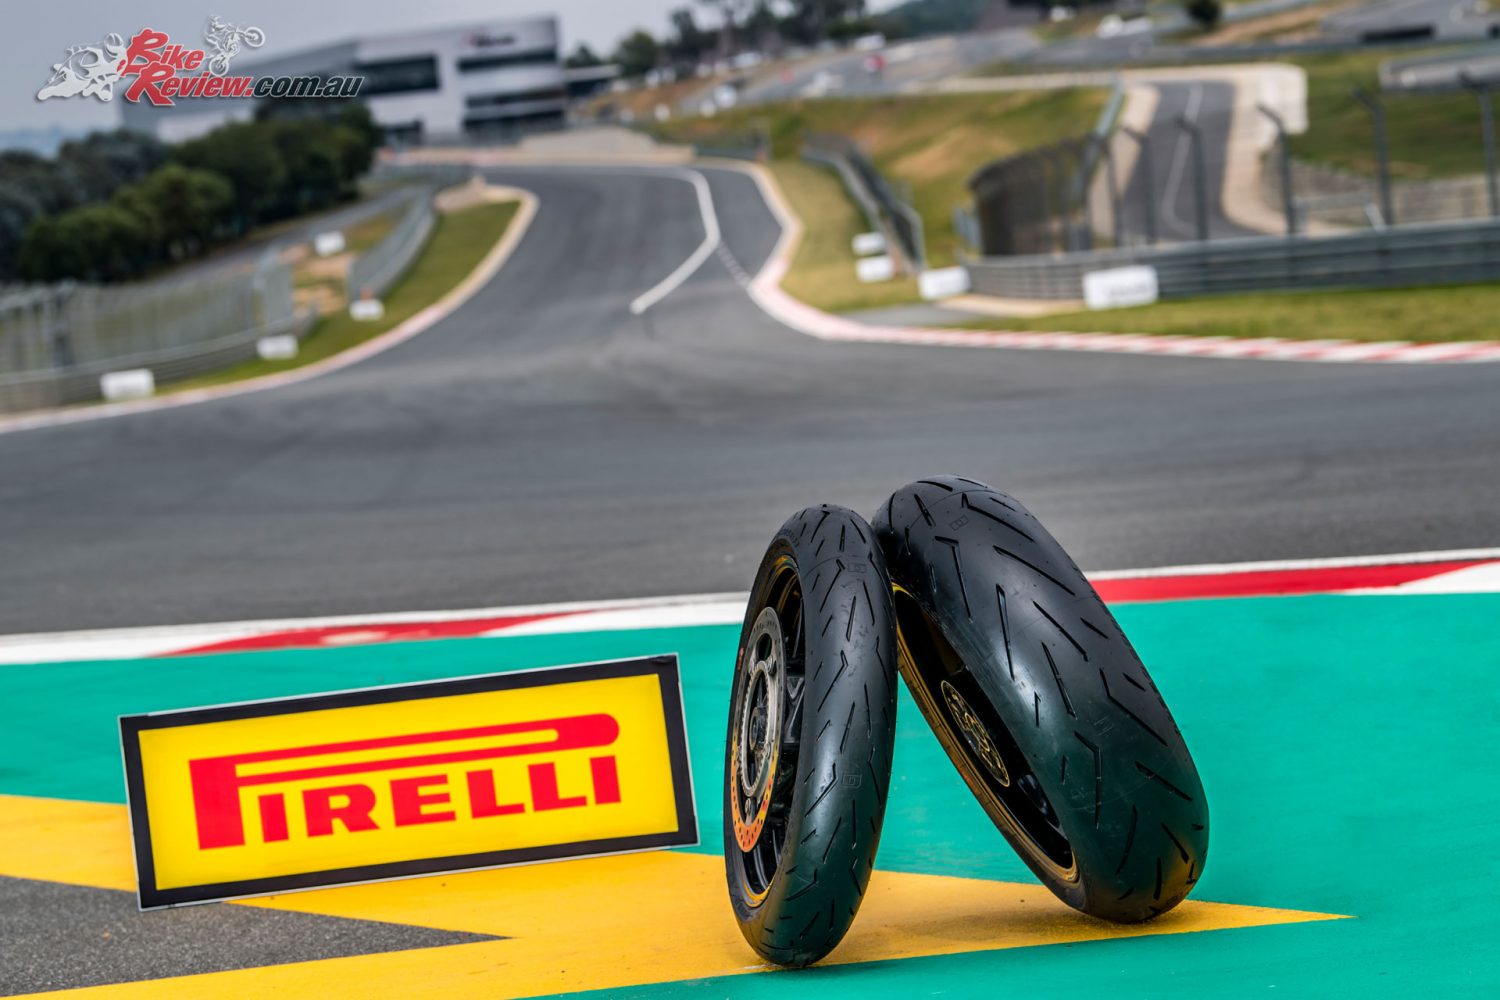 Pirelli's new Diablo Rosso Corsa II tyres at Kyalami Circuit in South Africa